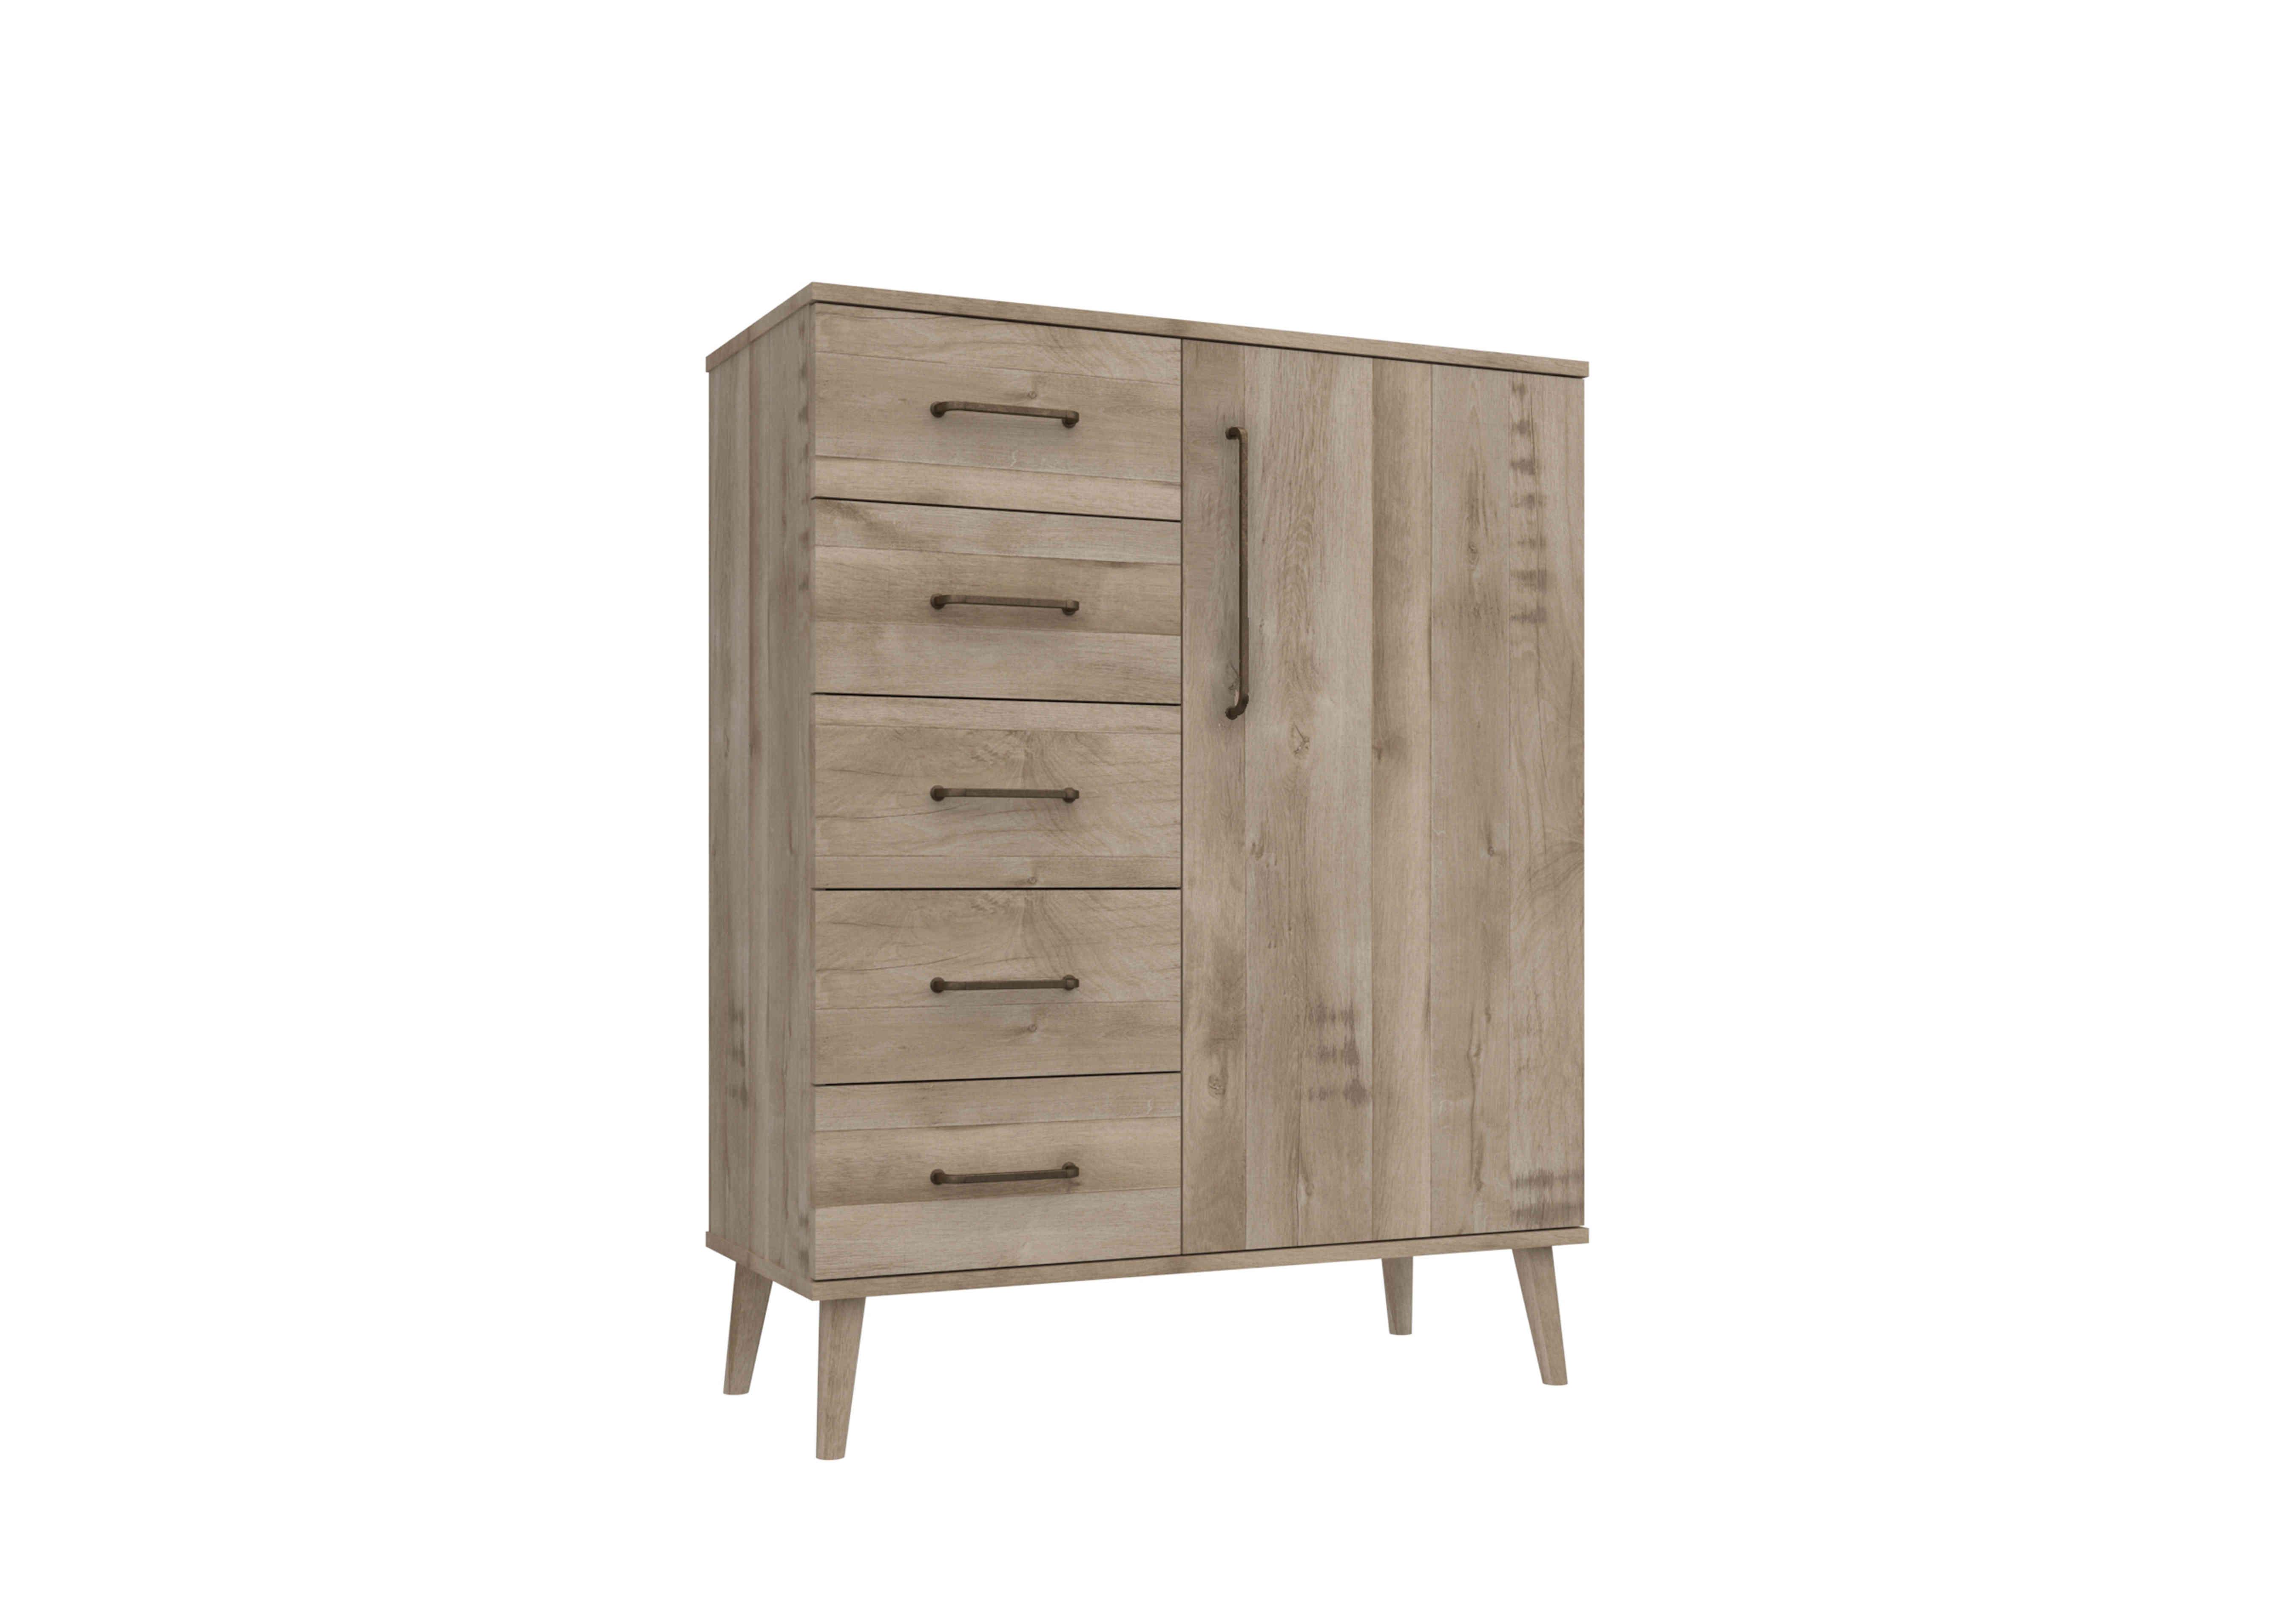 Finchley 5 Drawer Chest with Wardrobe in Italian Natural Oak on Furniture Village